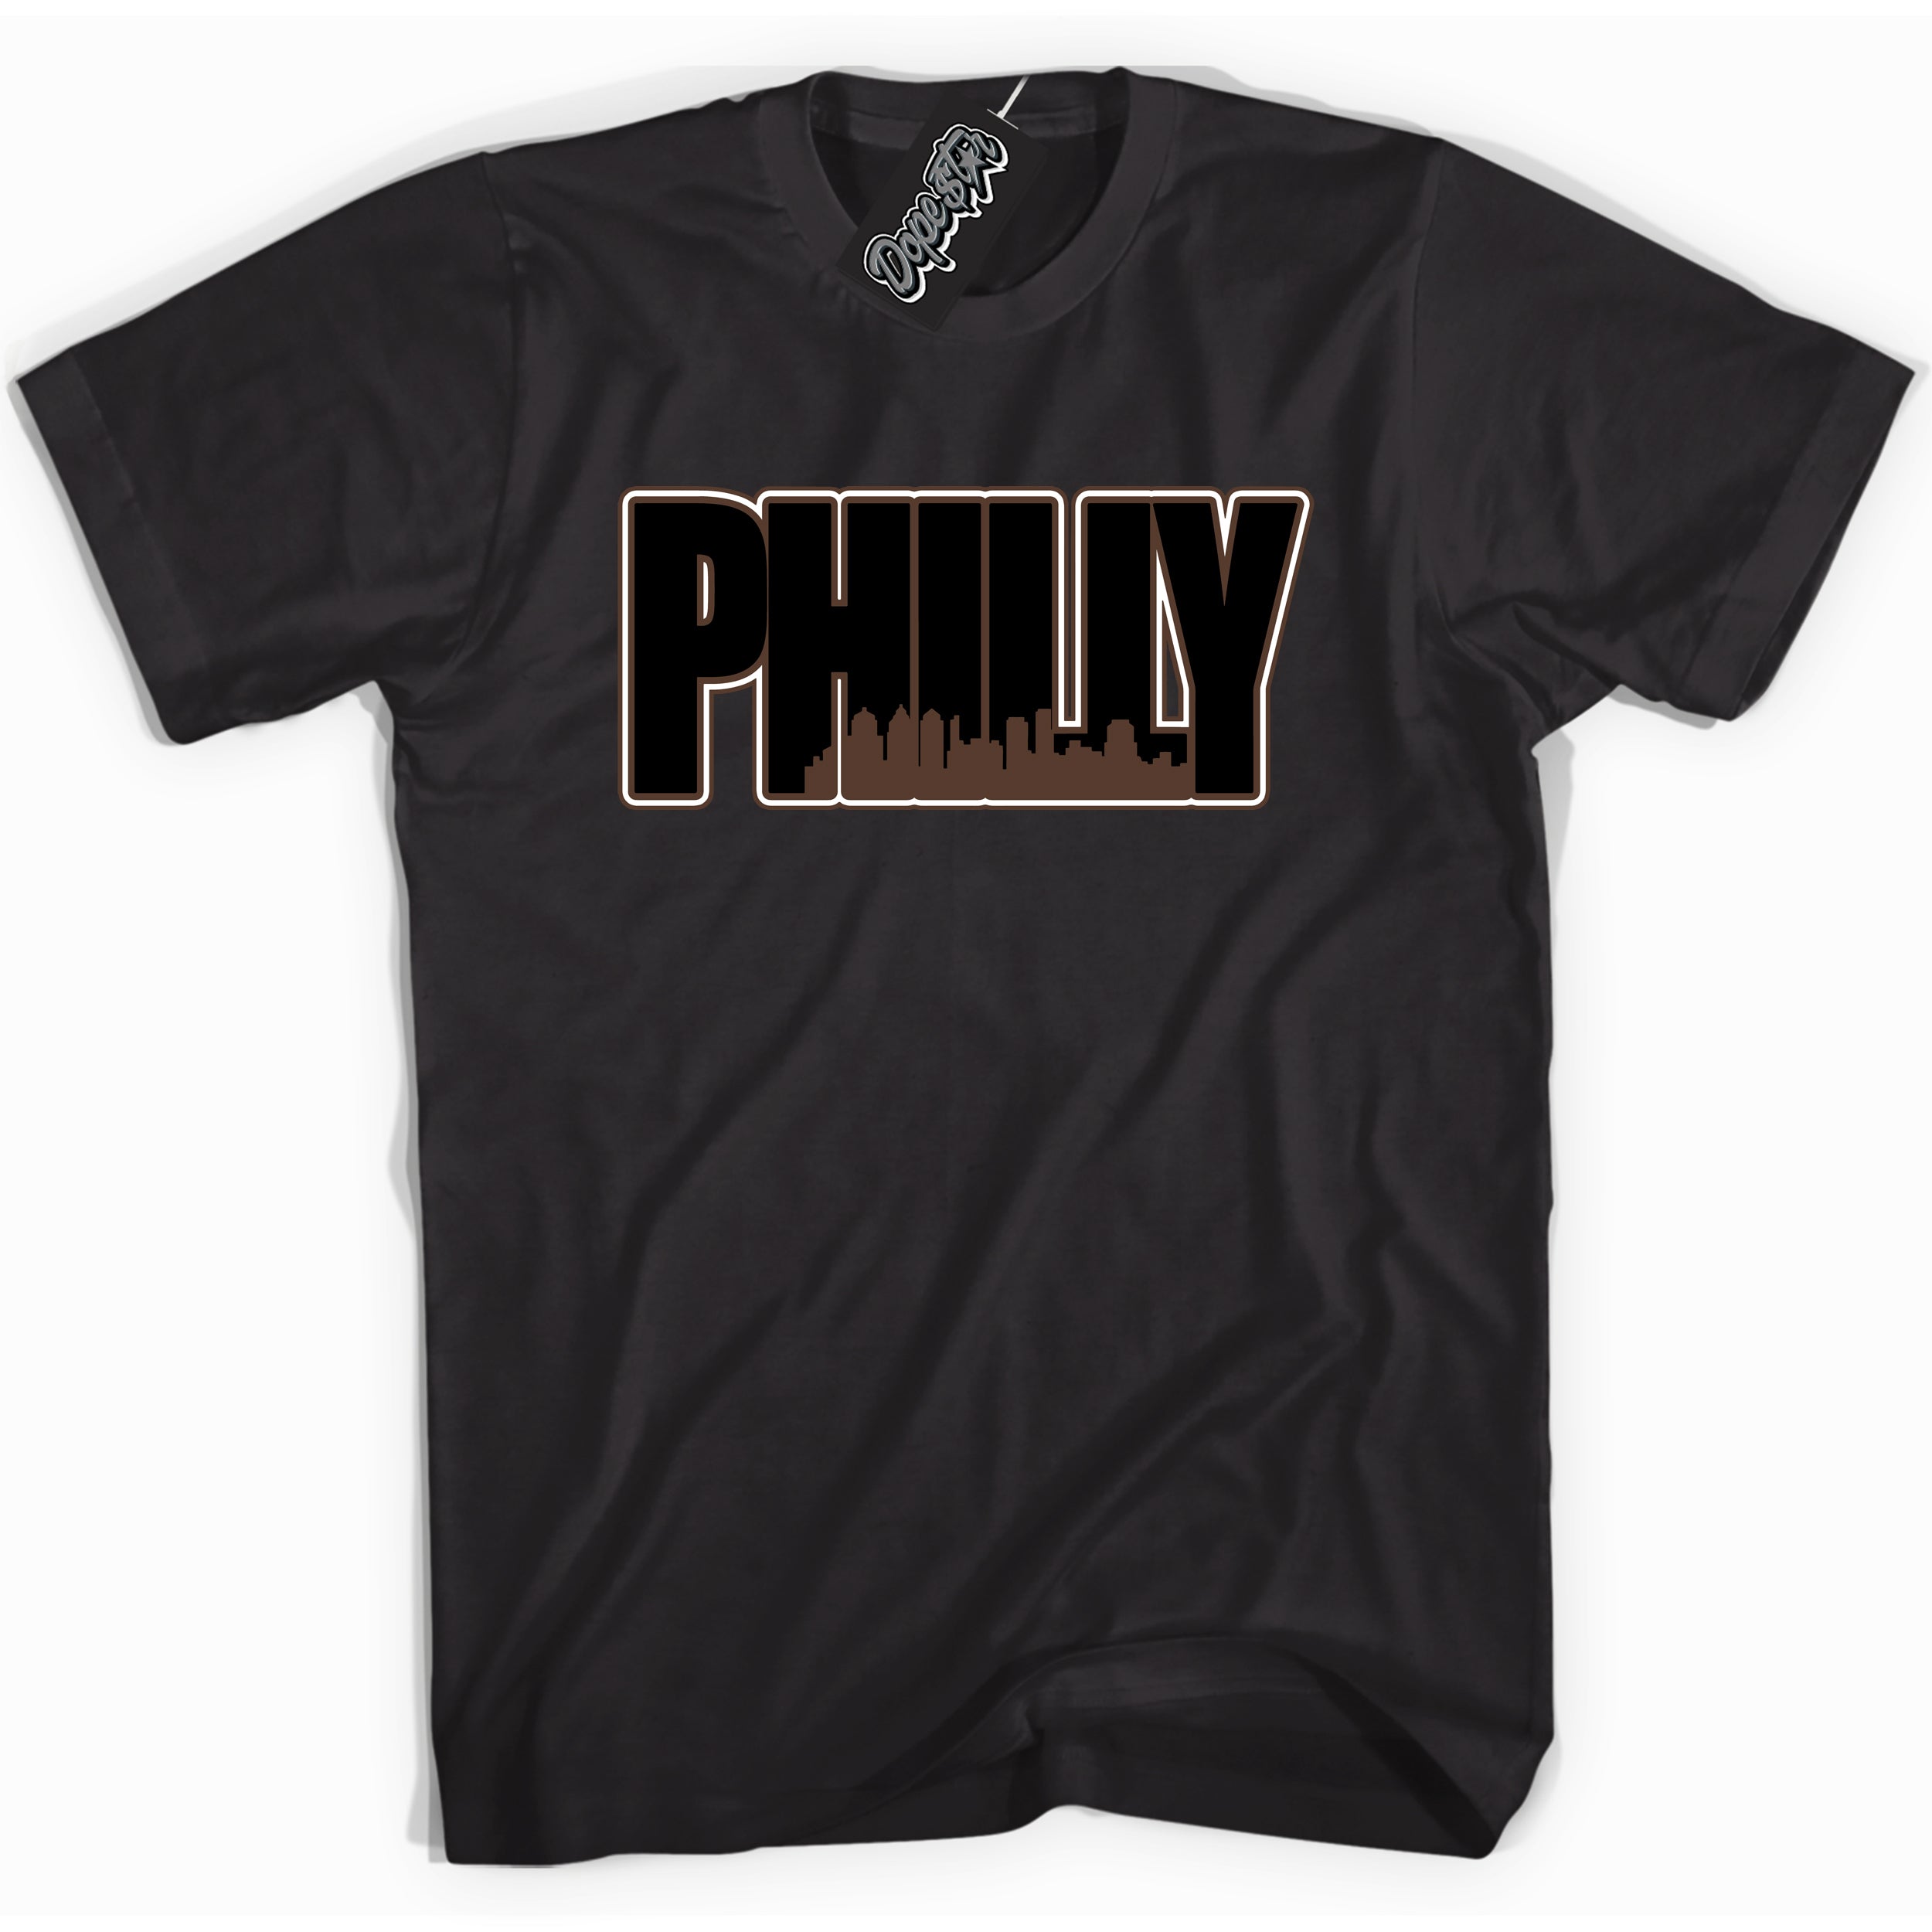 Cool Black graphic tee with “ Philly ” design, that perfectly matches Palomino 1s sneakers 